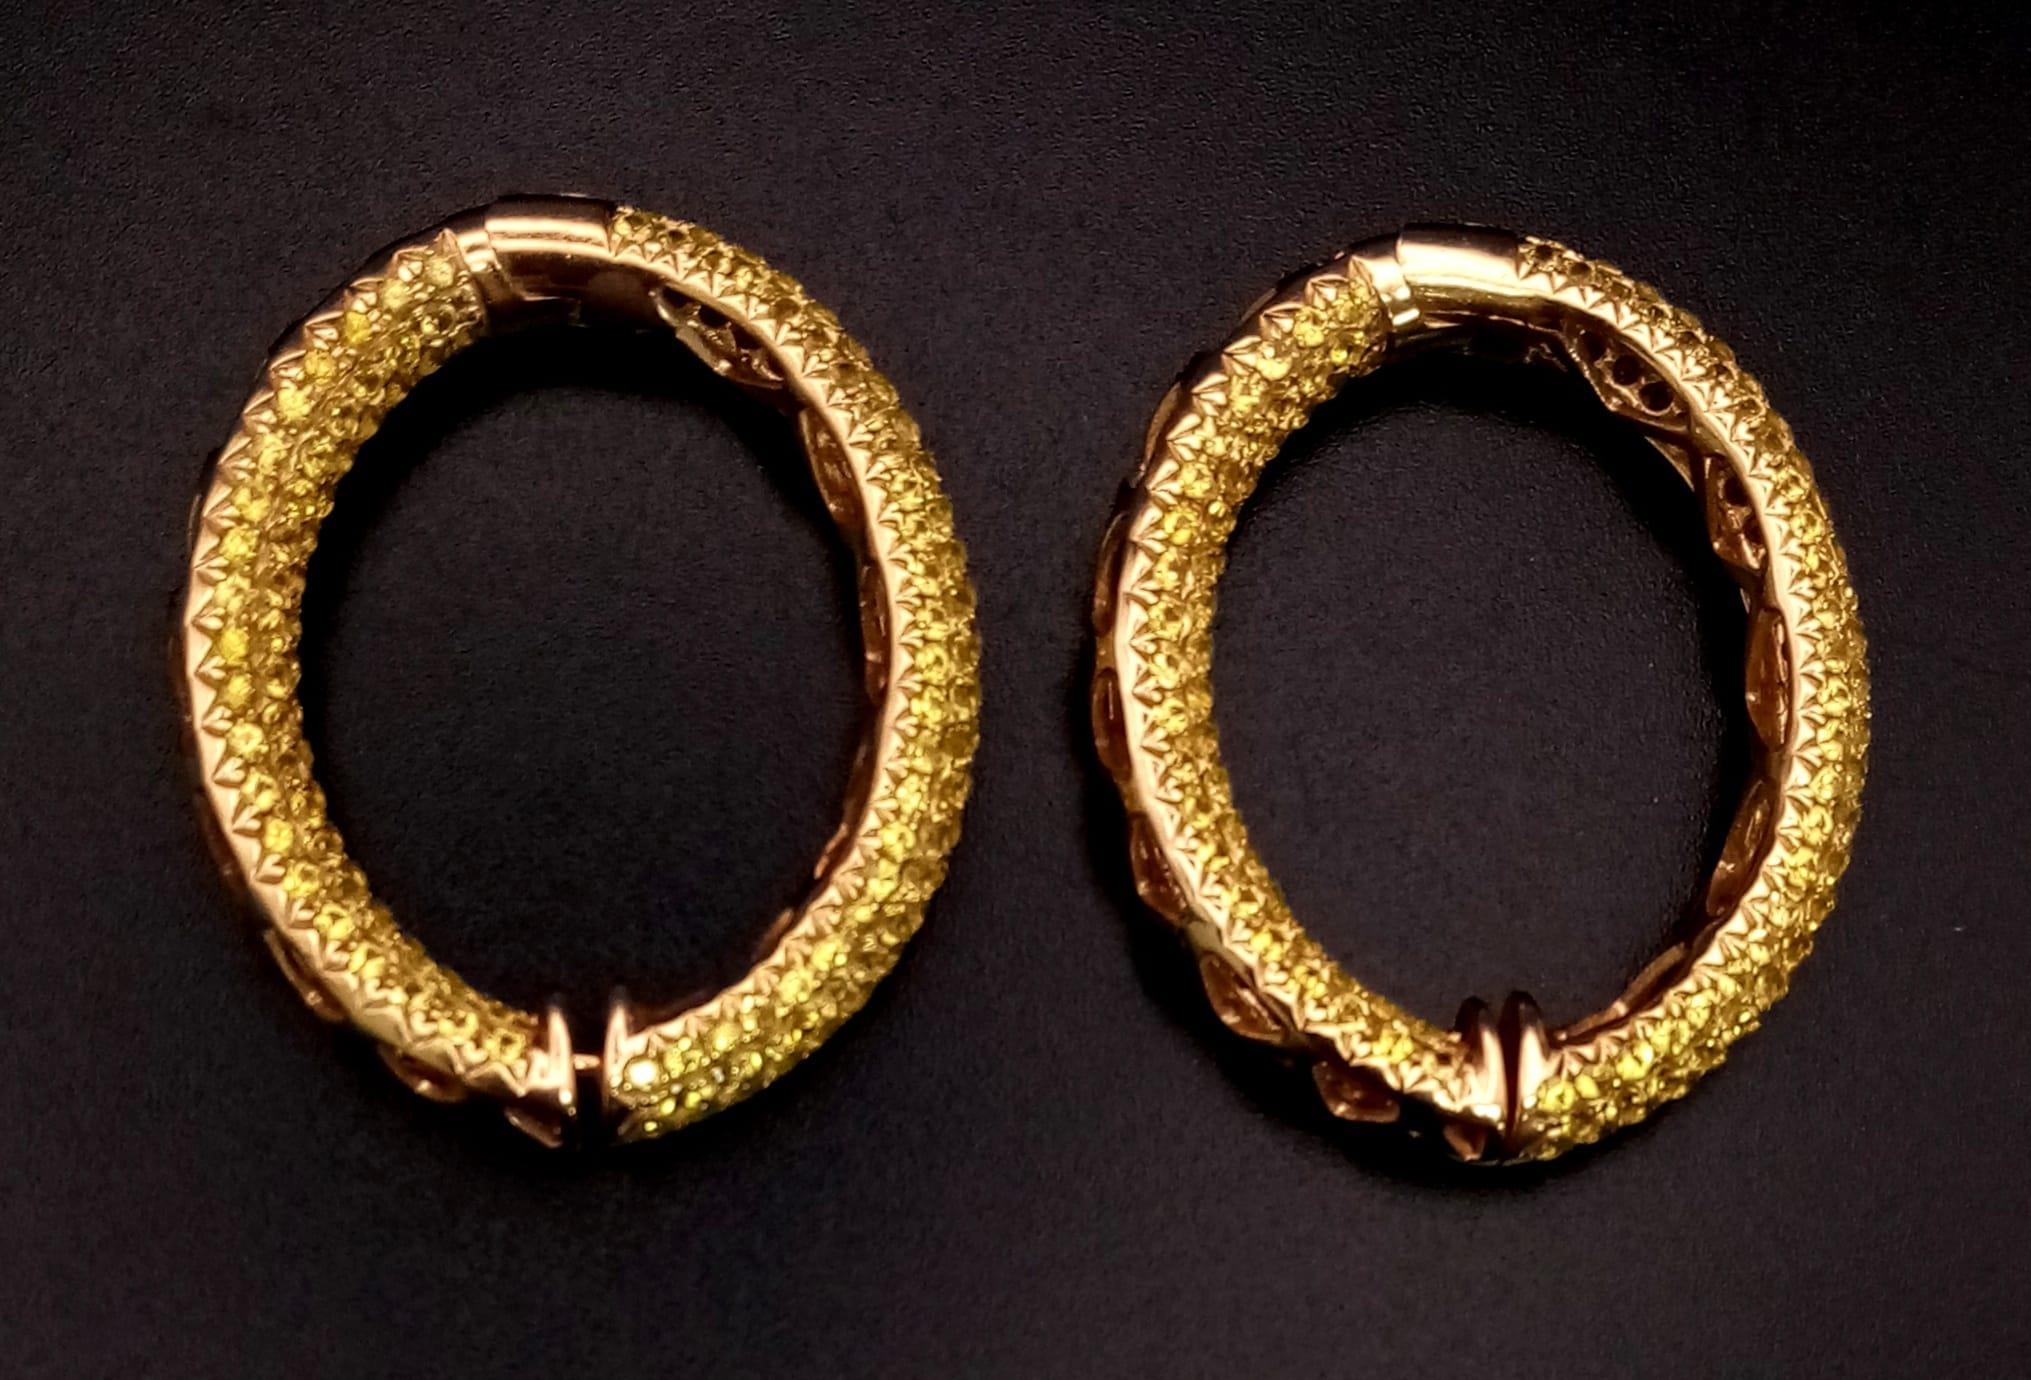 An 18K Yellow Gold and Yellow Stone Pair of Hoop Earrings. 19.16g total weight. Ref: 3710. - Bild 6 aus 8